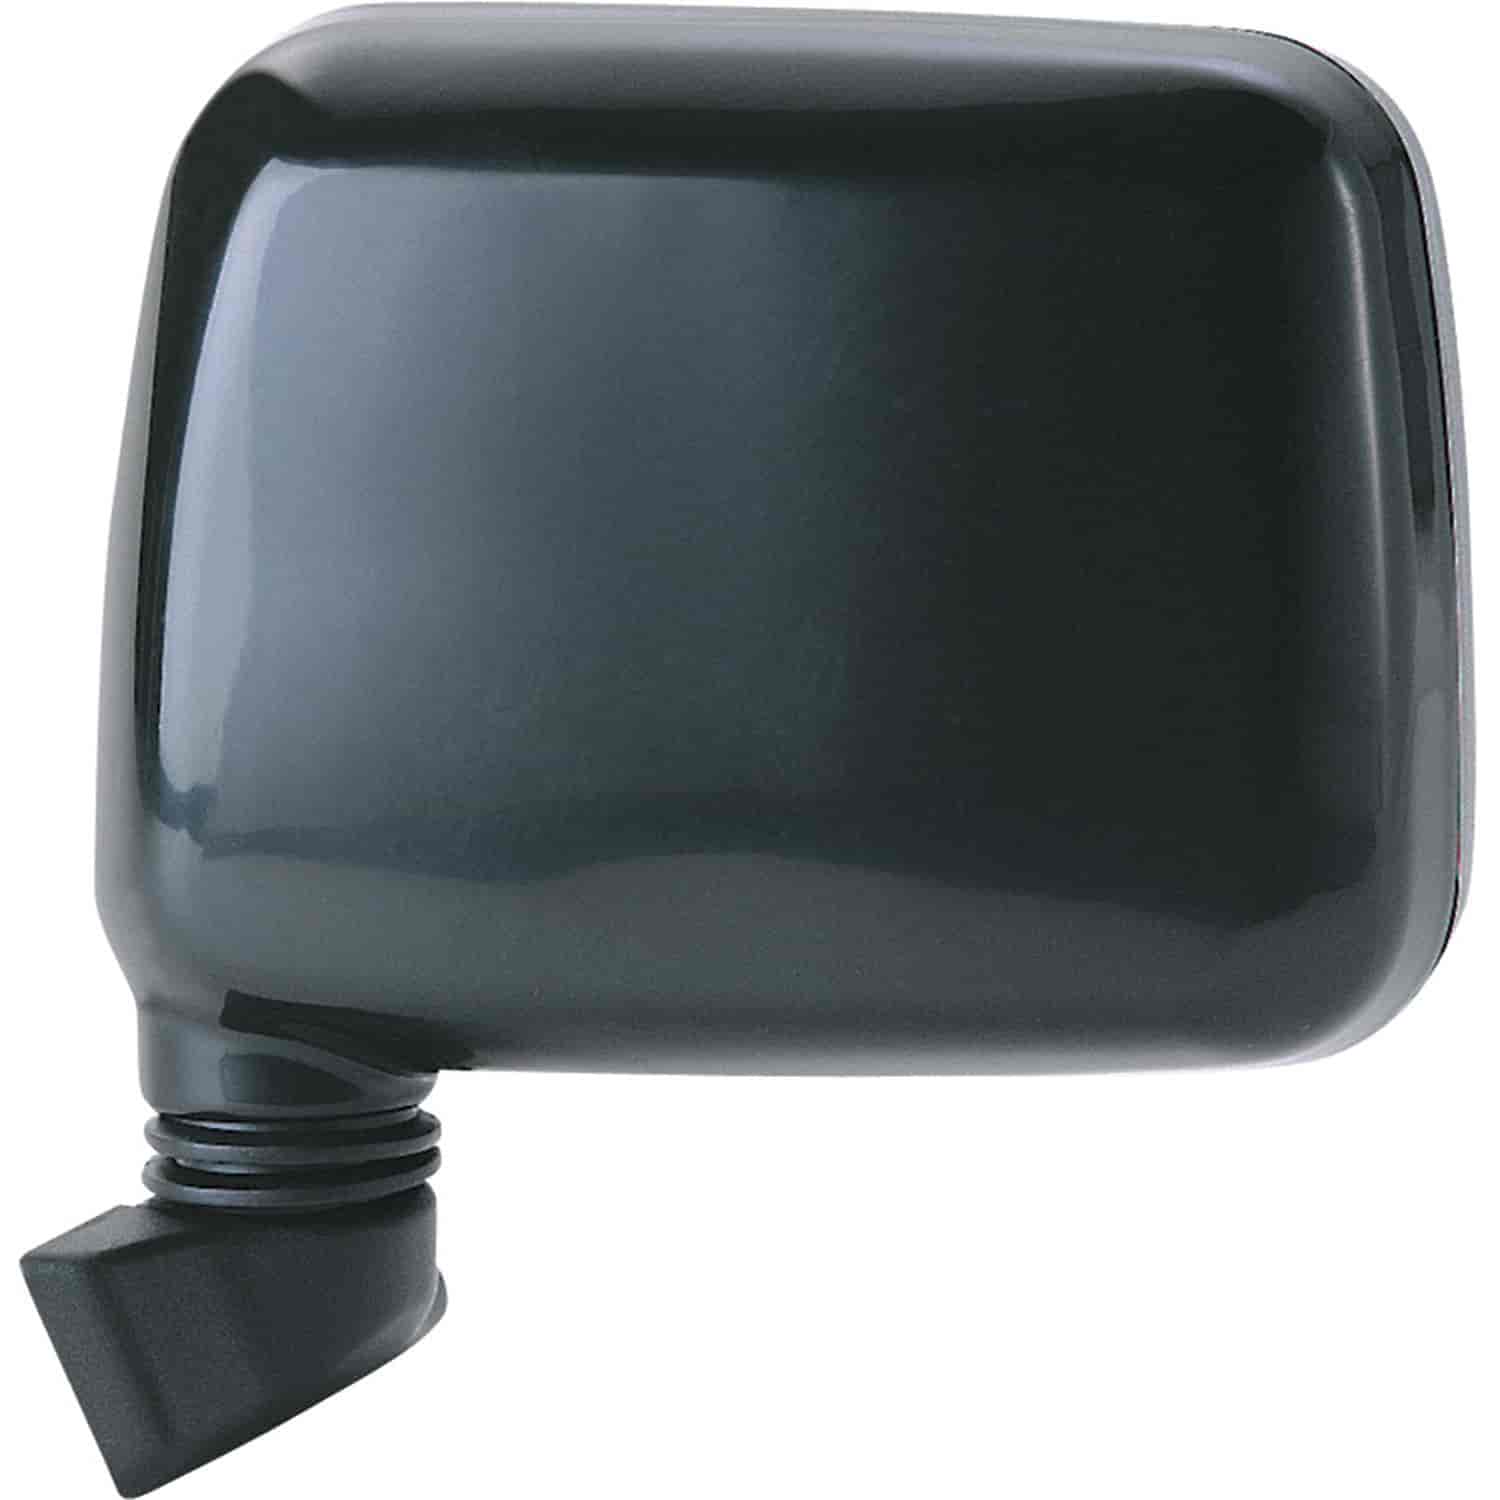 OEM Style Replacement mirror for 88-93 Isuzu Pick-Up Japan built 91-92 Rodeo driver side mirror test